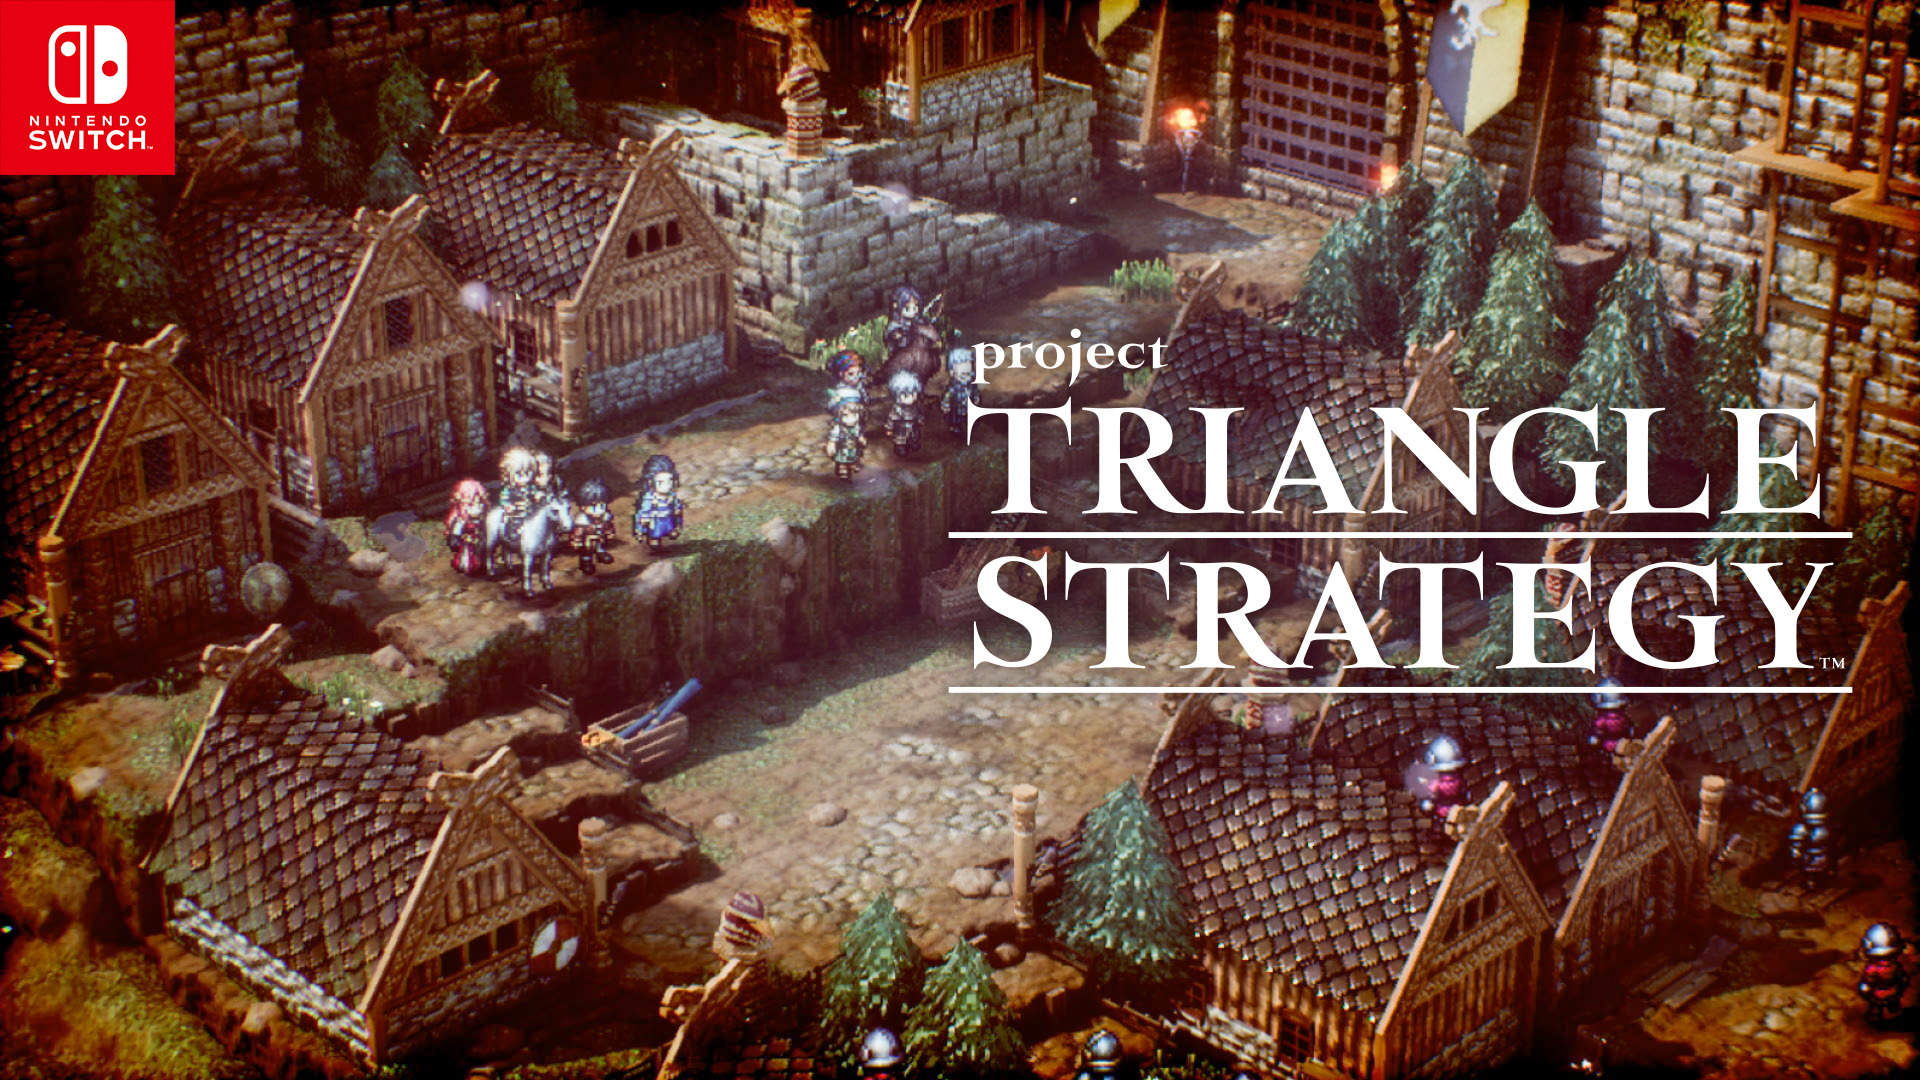 Project TRIANGLE STRATEGY』の物語は“大人向け”―『オクトパス